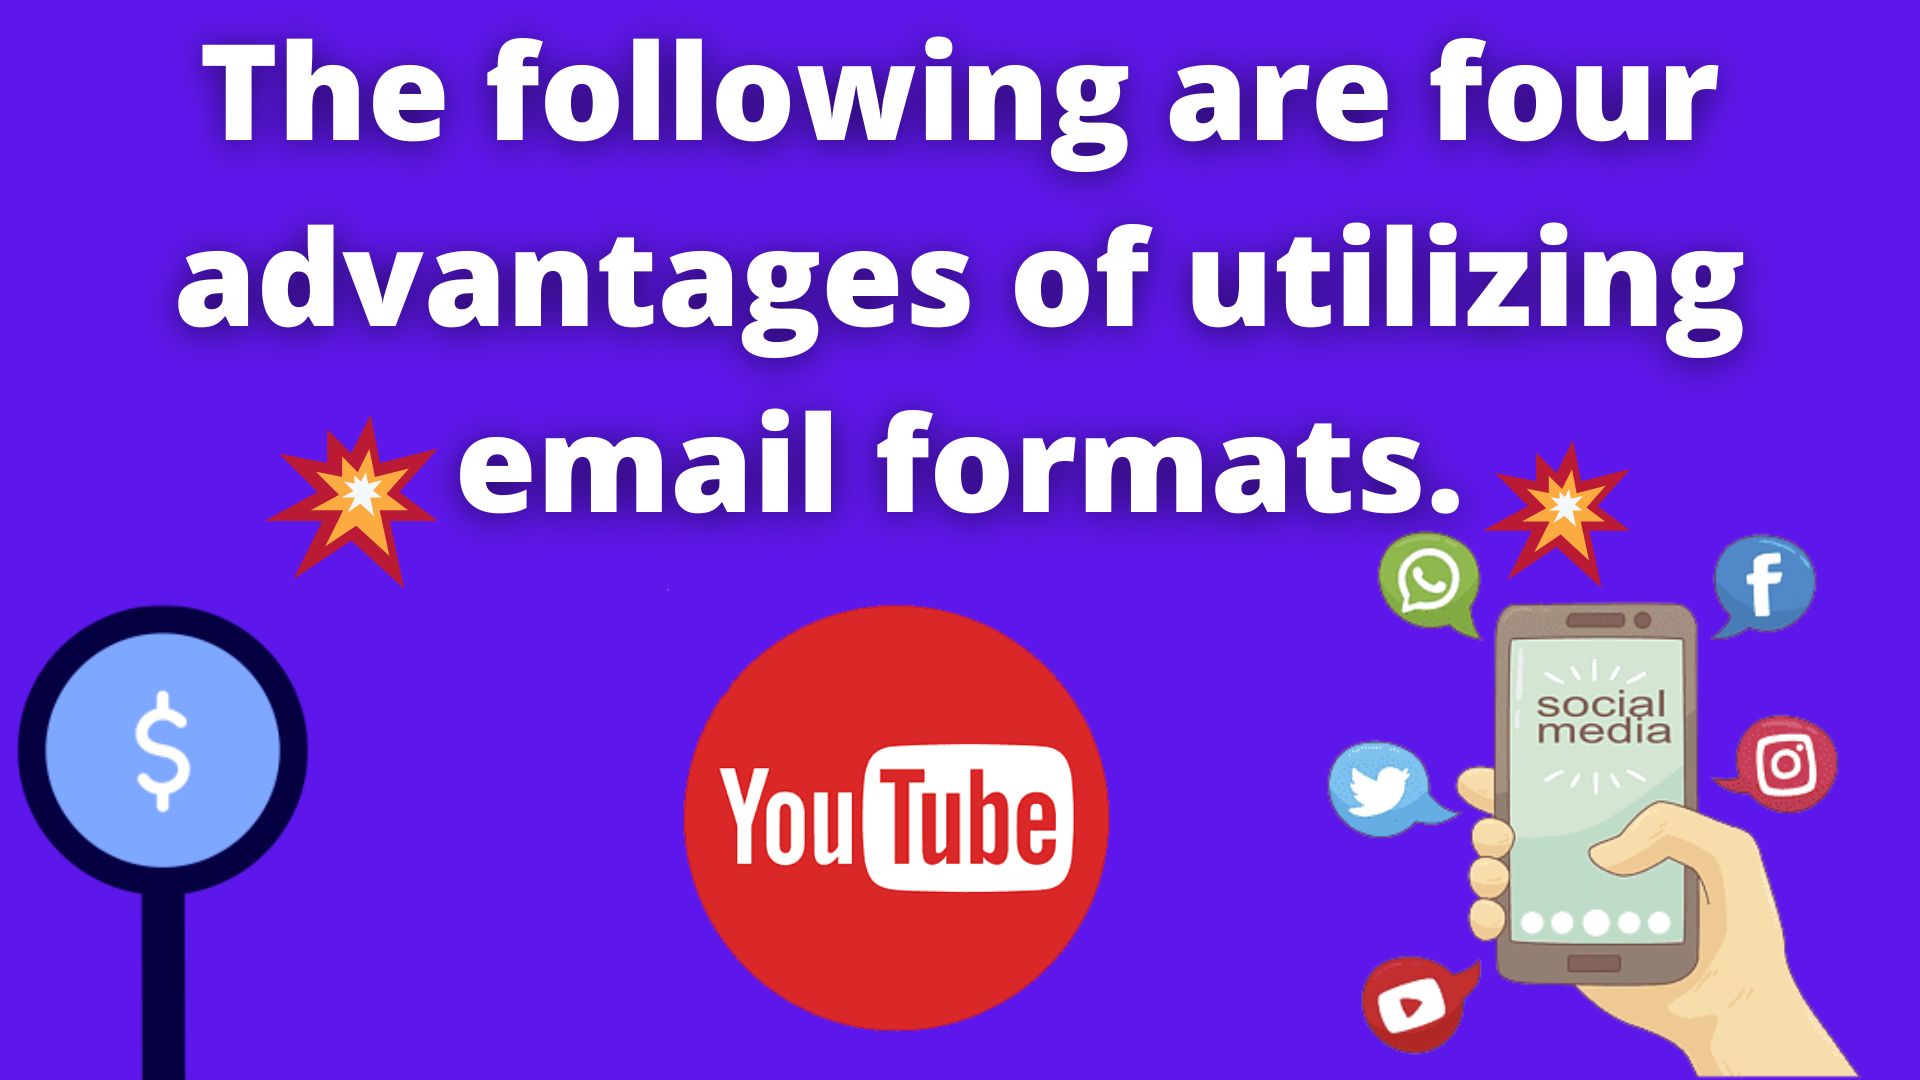 The following are four advantages of utilizing email formats.